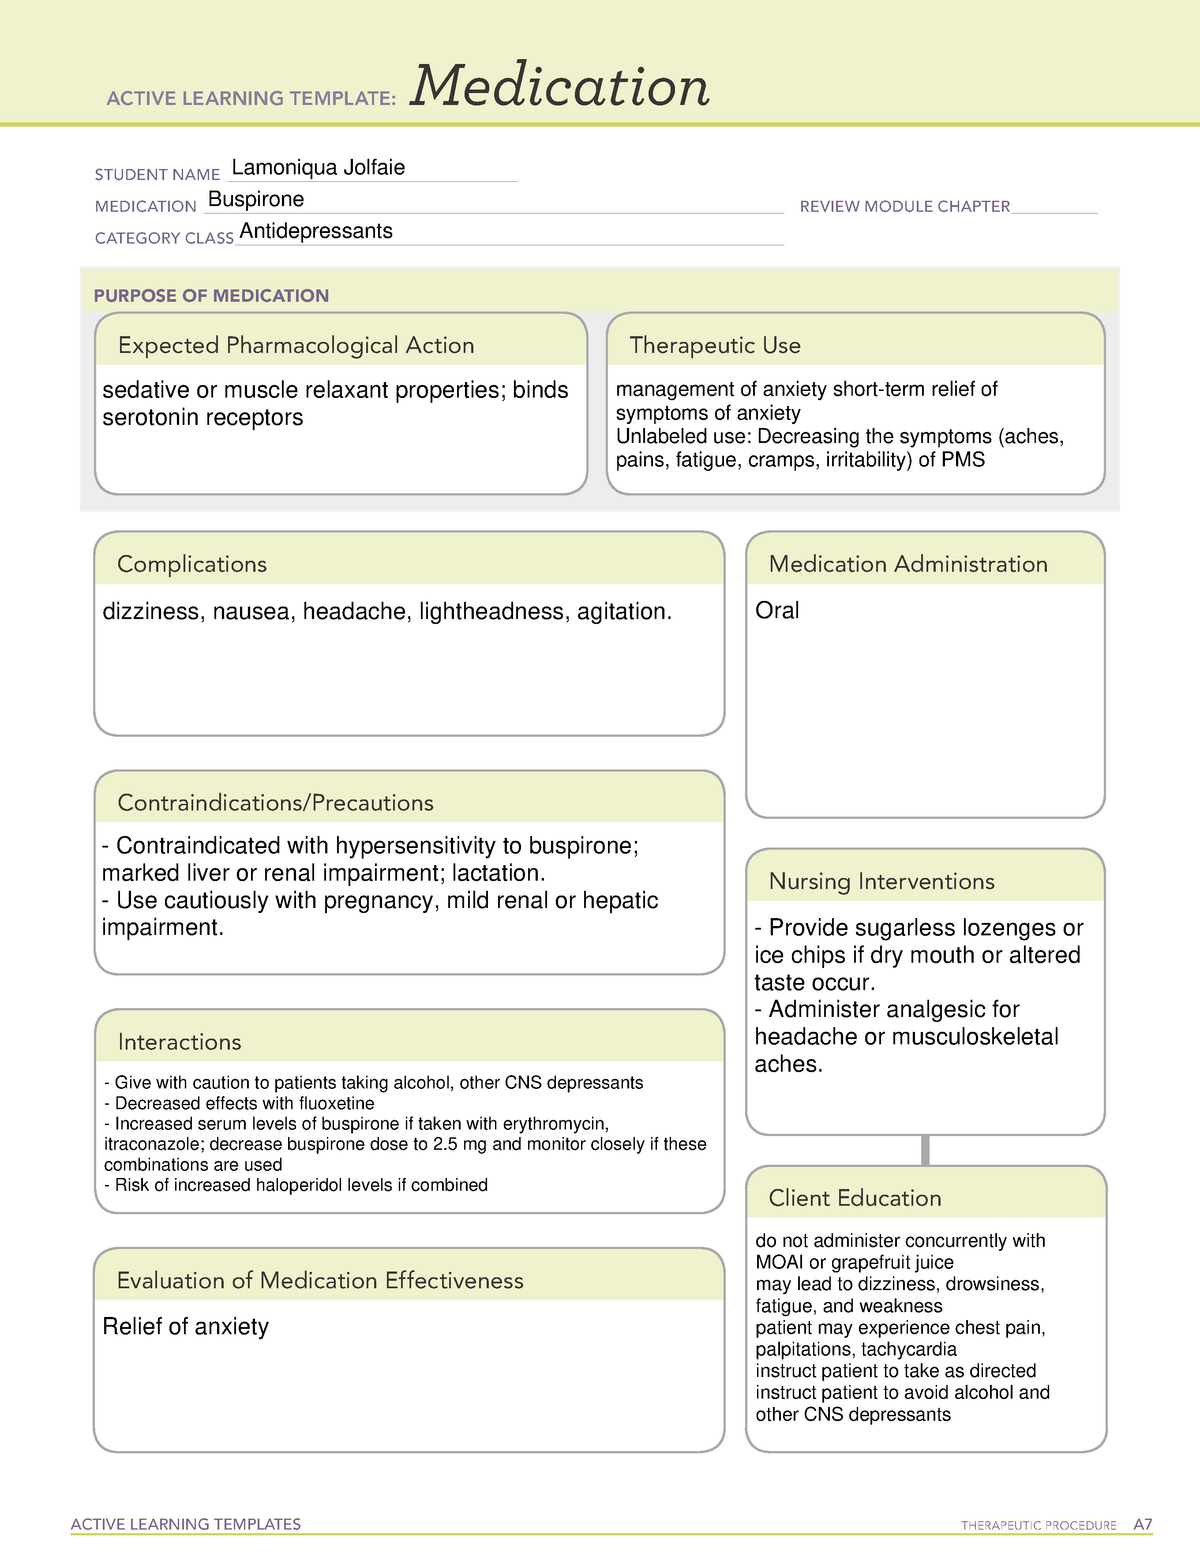 Buspirone Med Card ACTIVE LEARNING TEMPLATES THERAPEUTIC PROCEDURE A